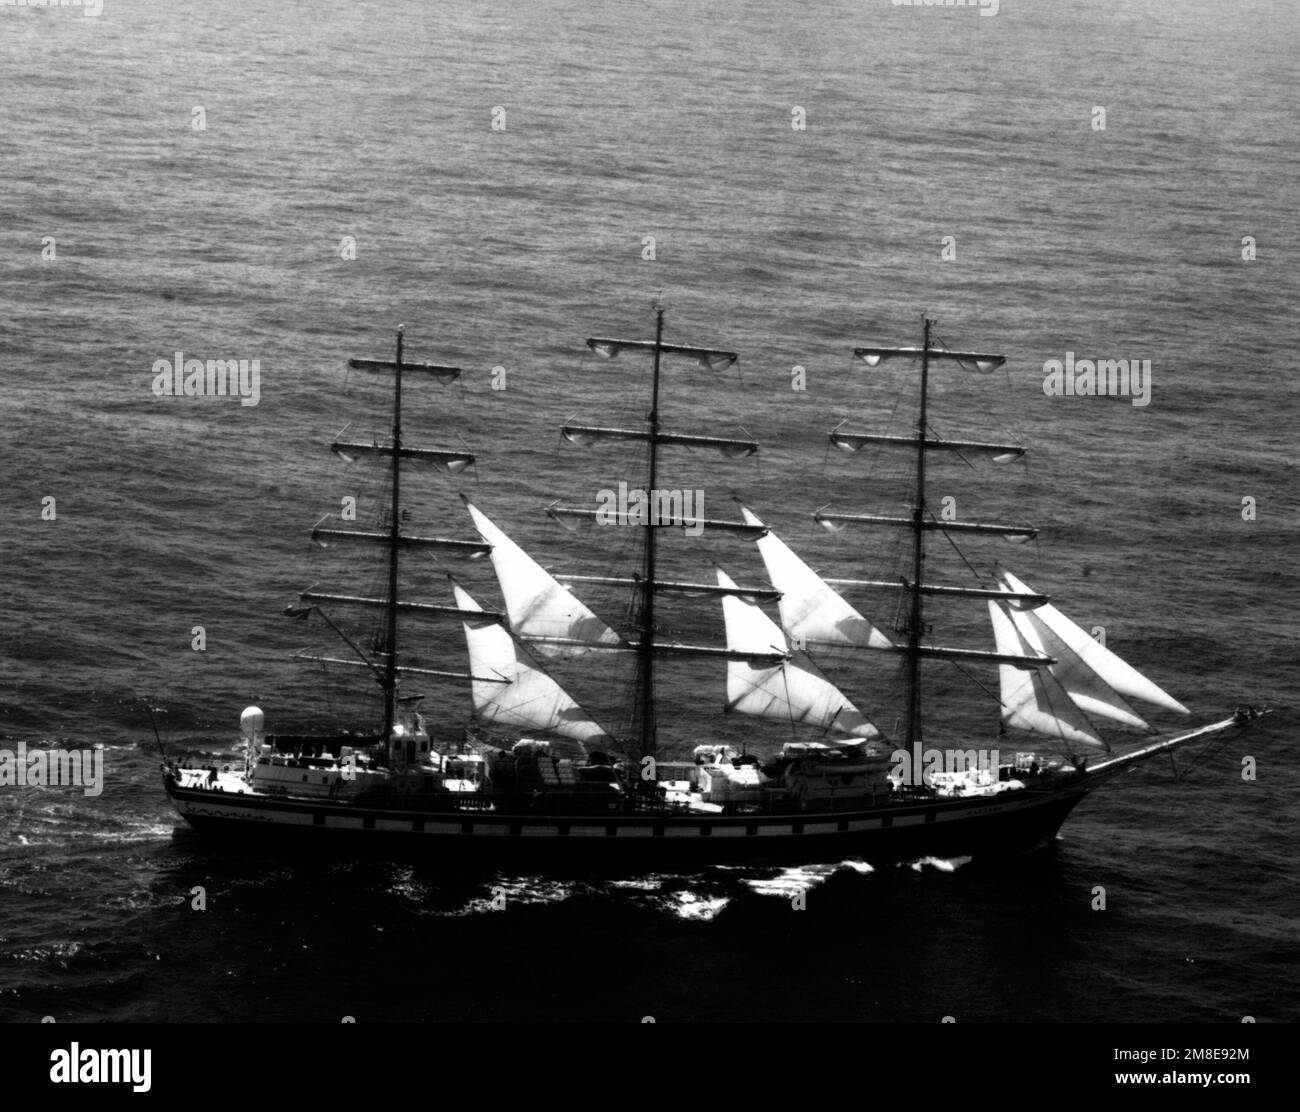 A starbaord view of the Russian merchant marine sail training ship PALLADA underway. Country: Unknown Stock Photo